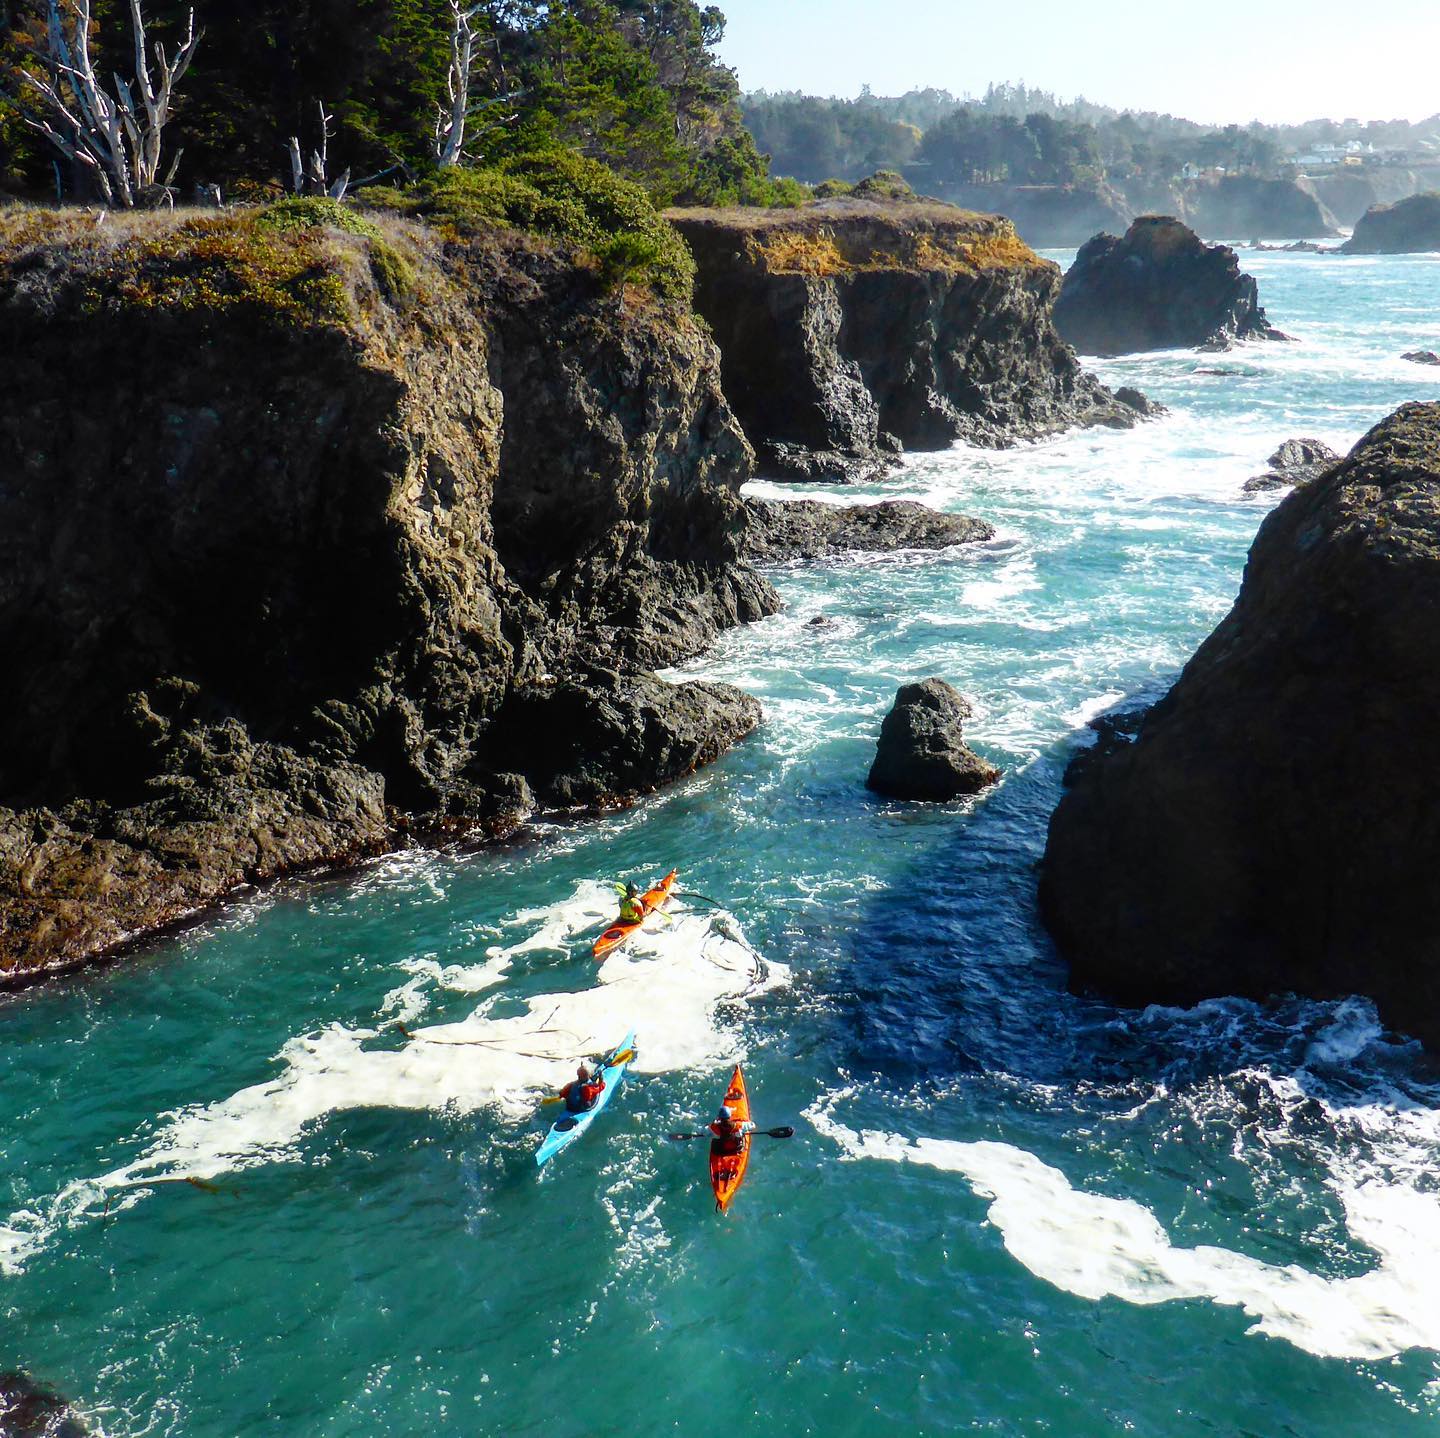 Photo of kayakers in Mendocino, Californi. They are paddling through blue water with cliffs on both sides